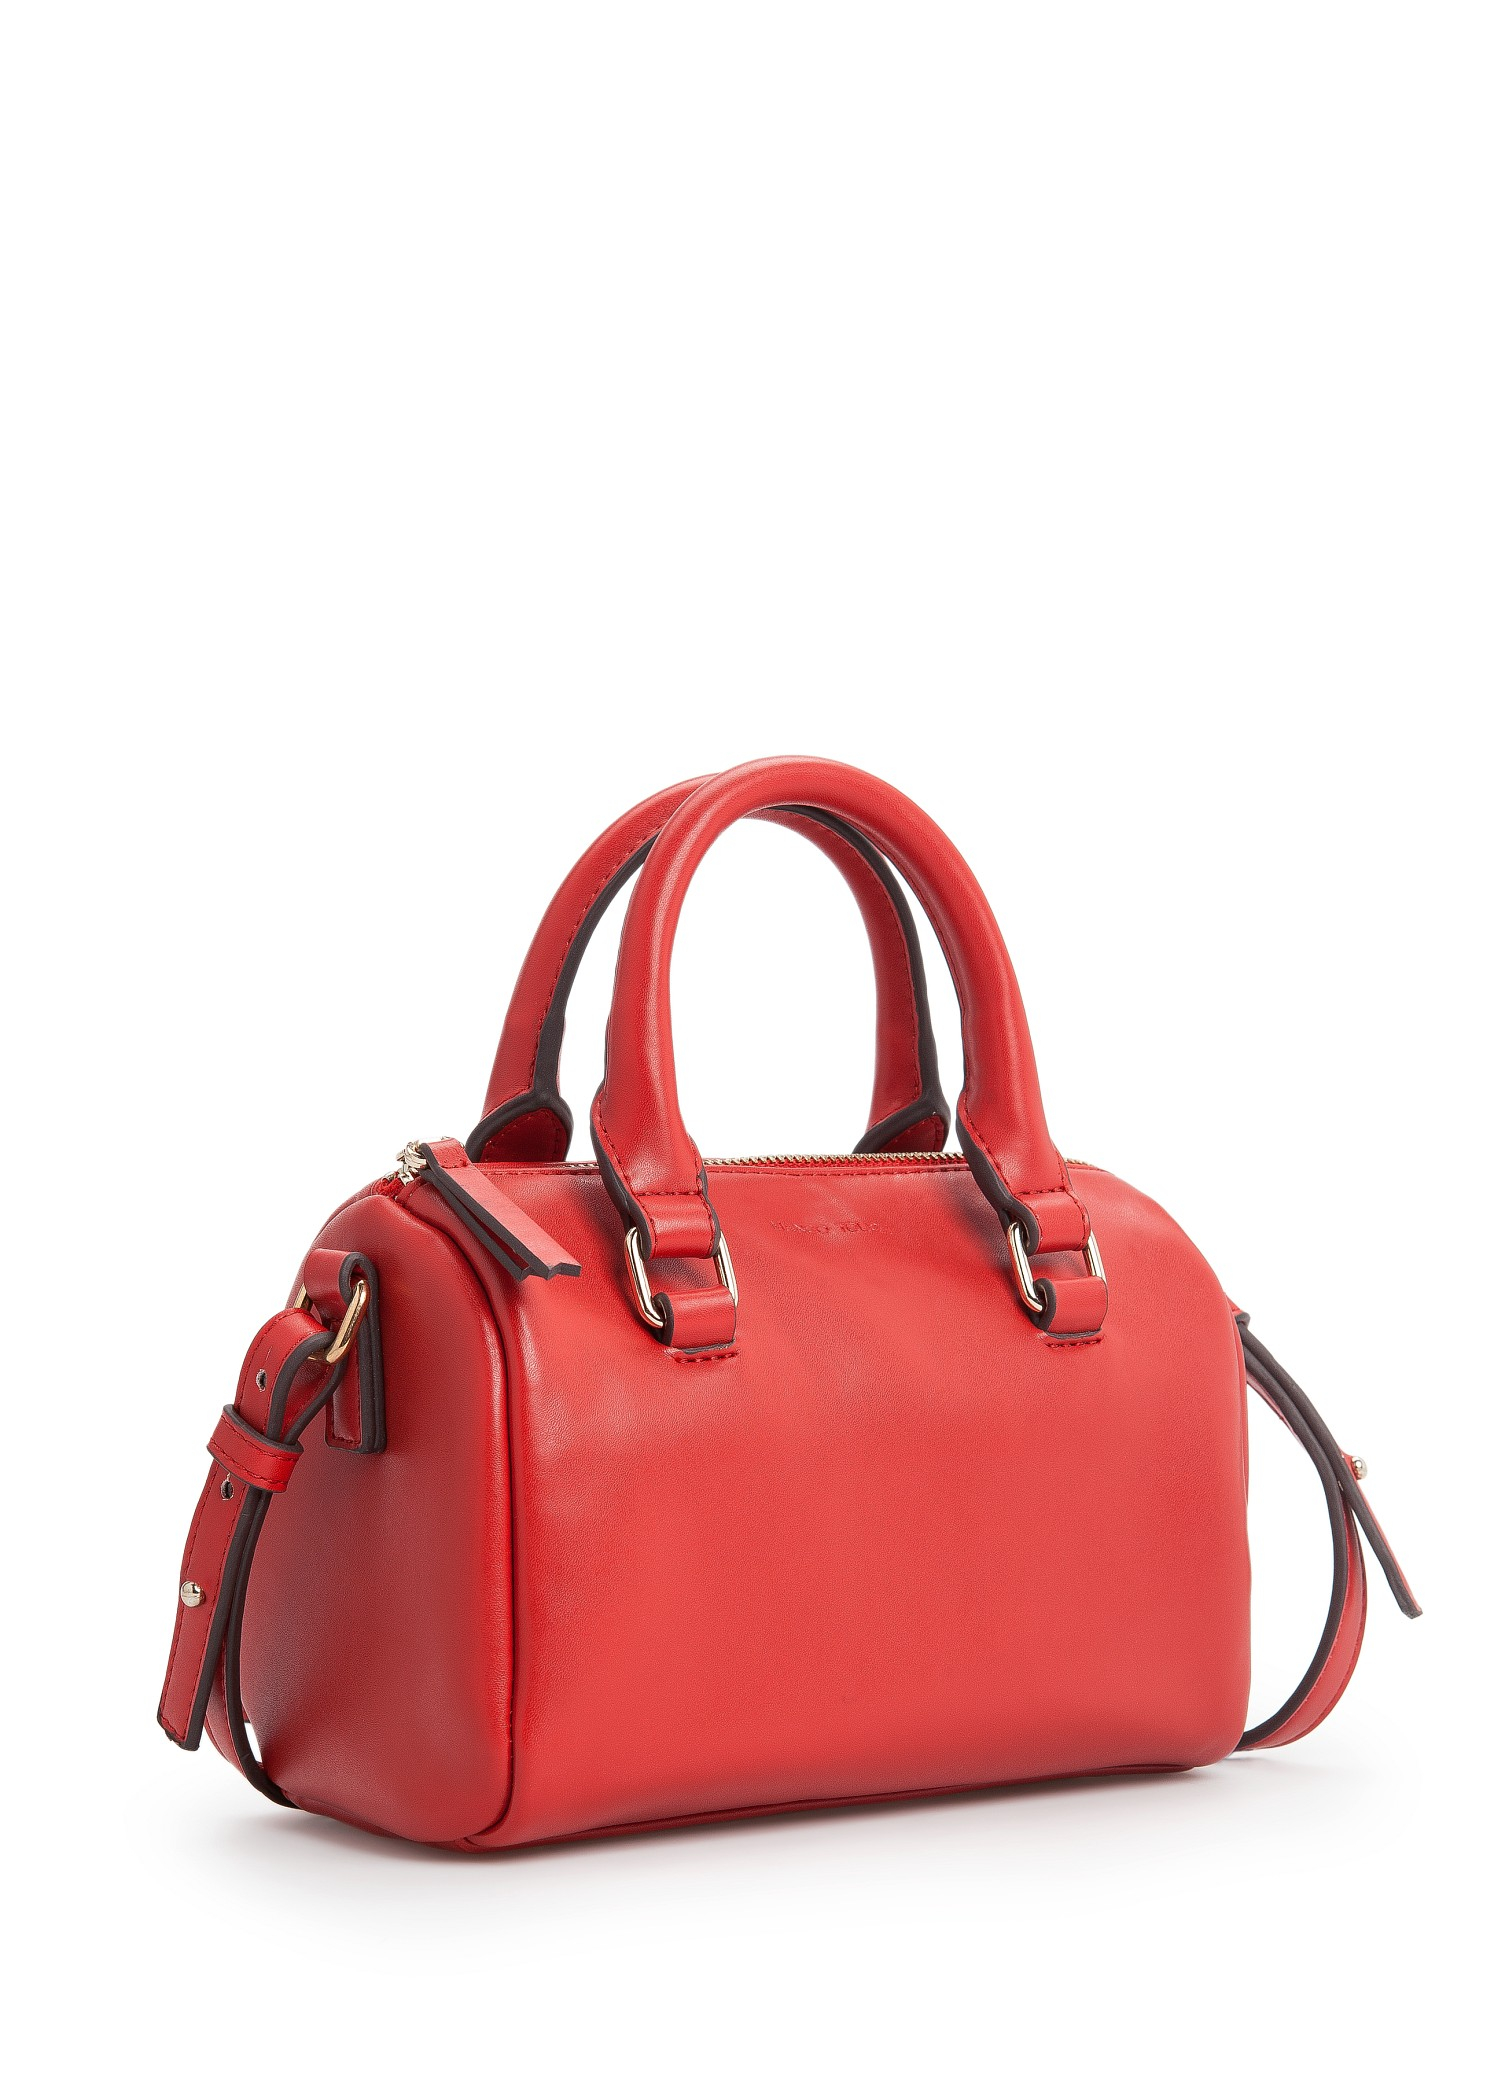 Lyst - Mango Small Bowling Bag in Red